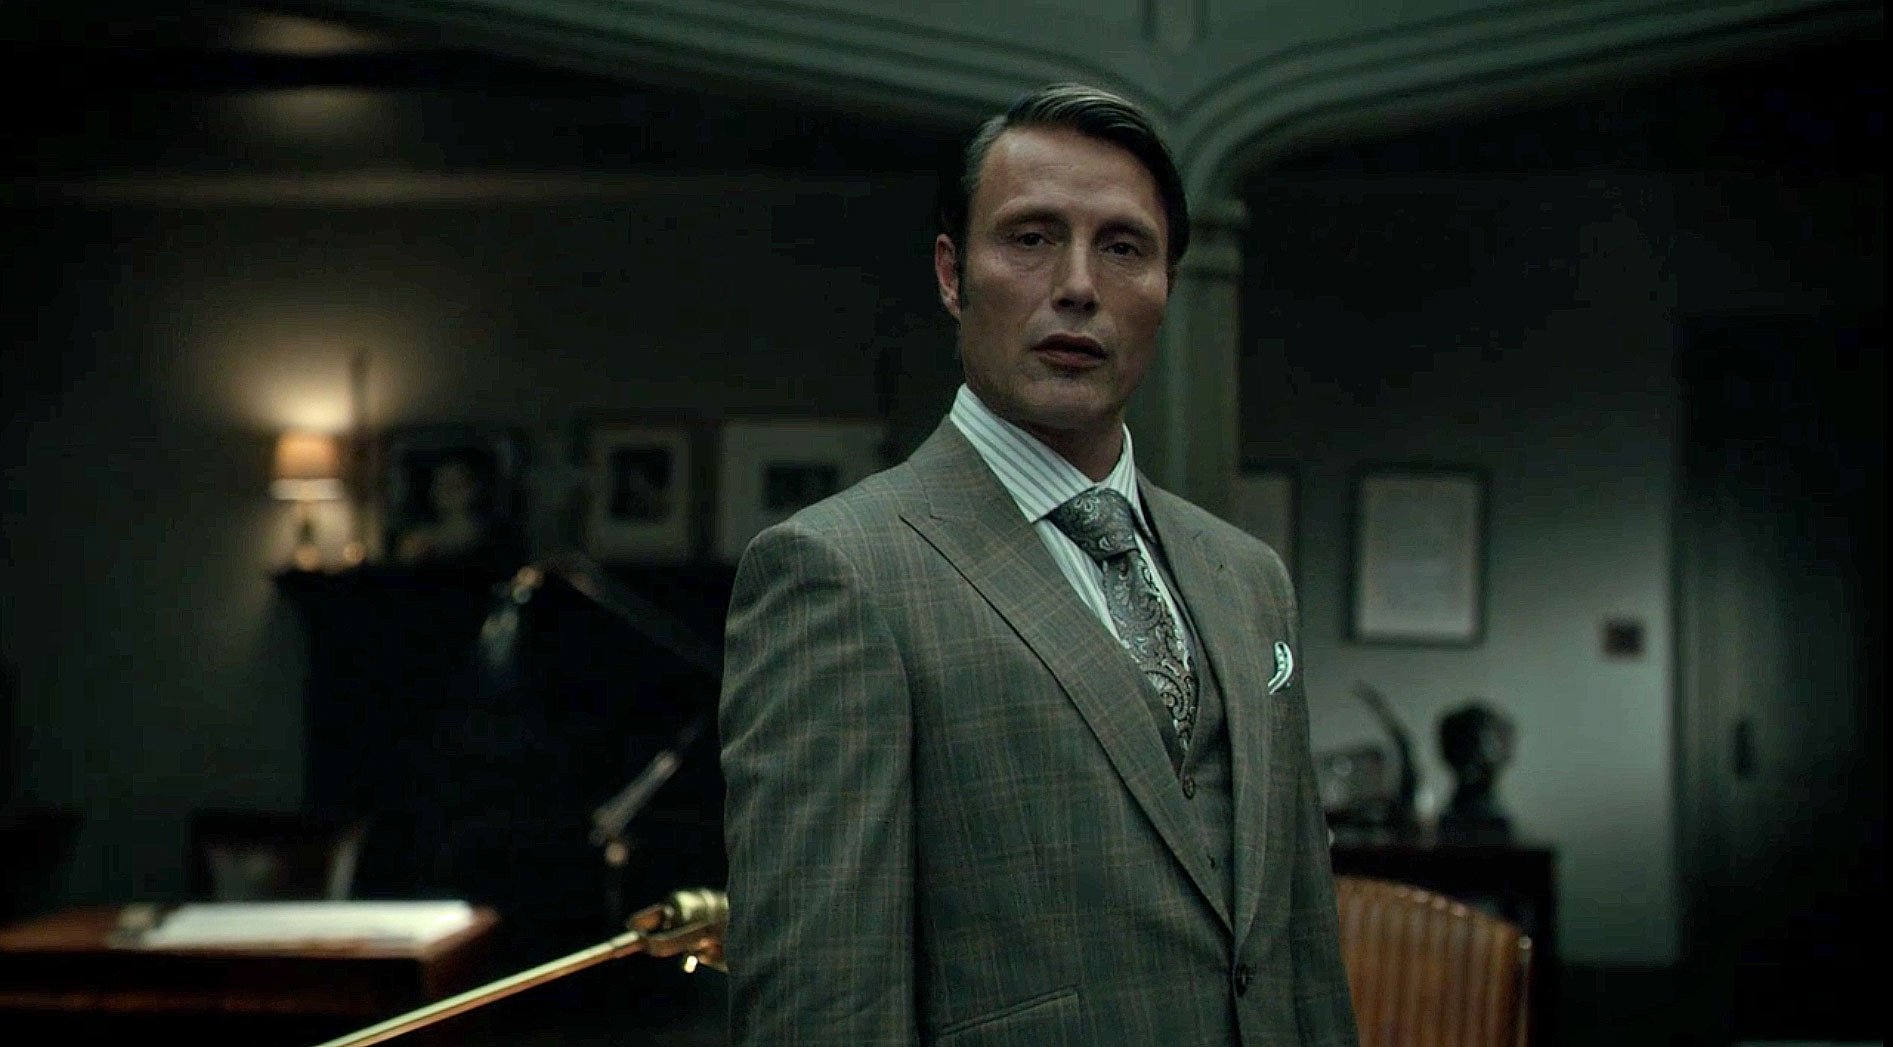 Posture in a suit Hannibal 